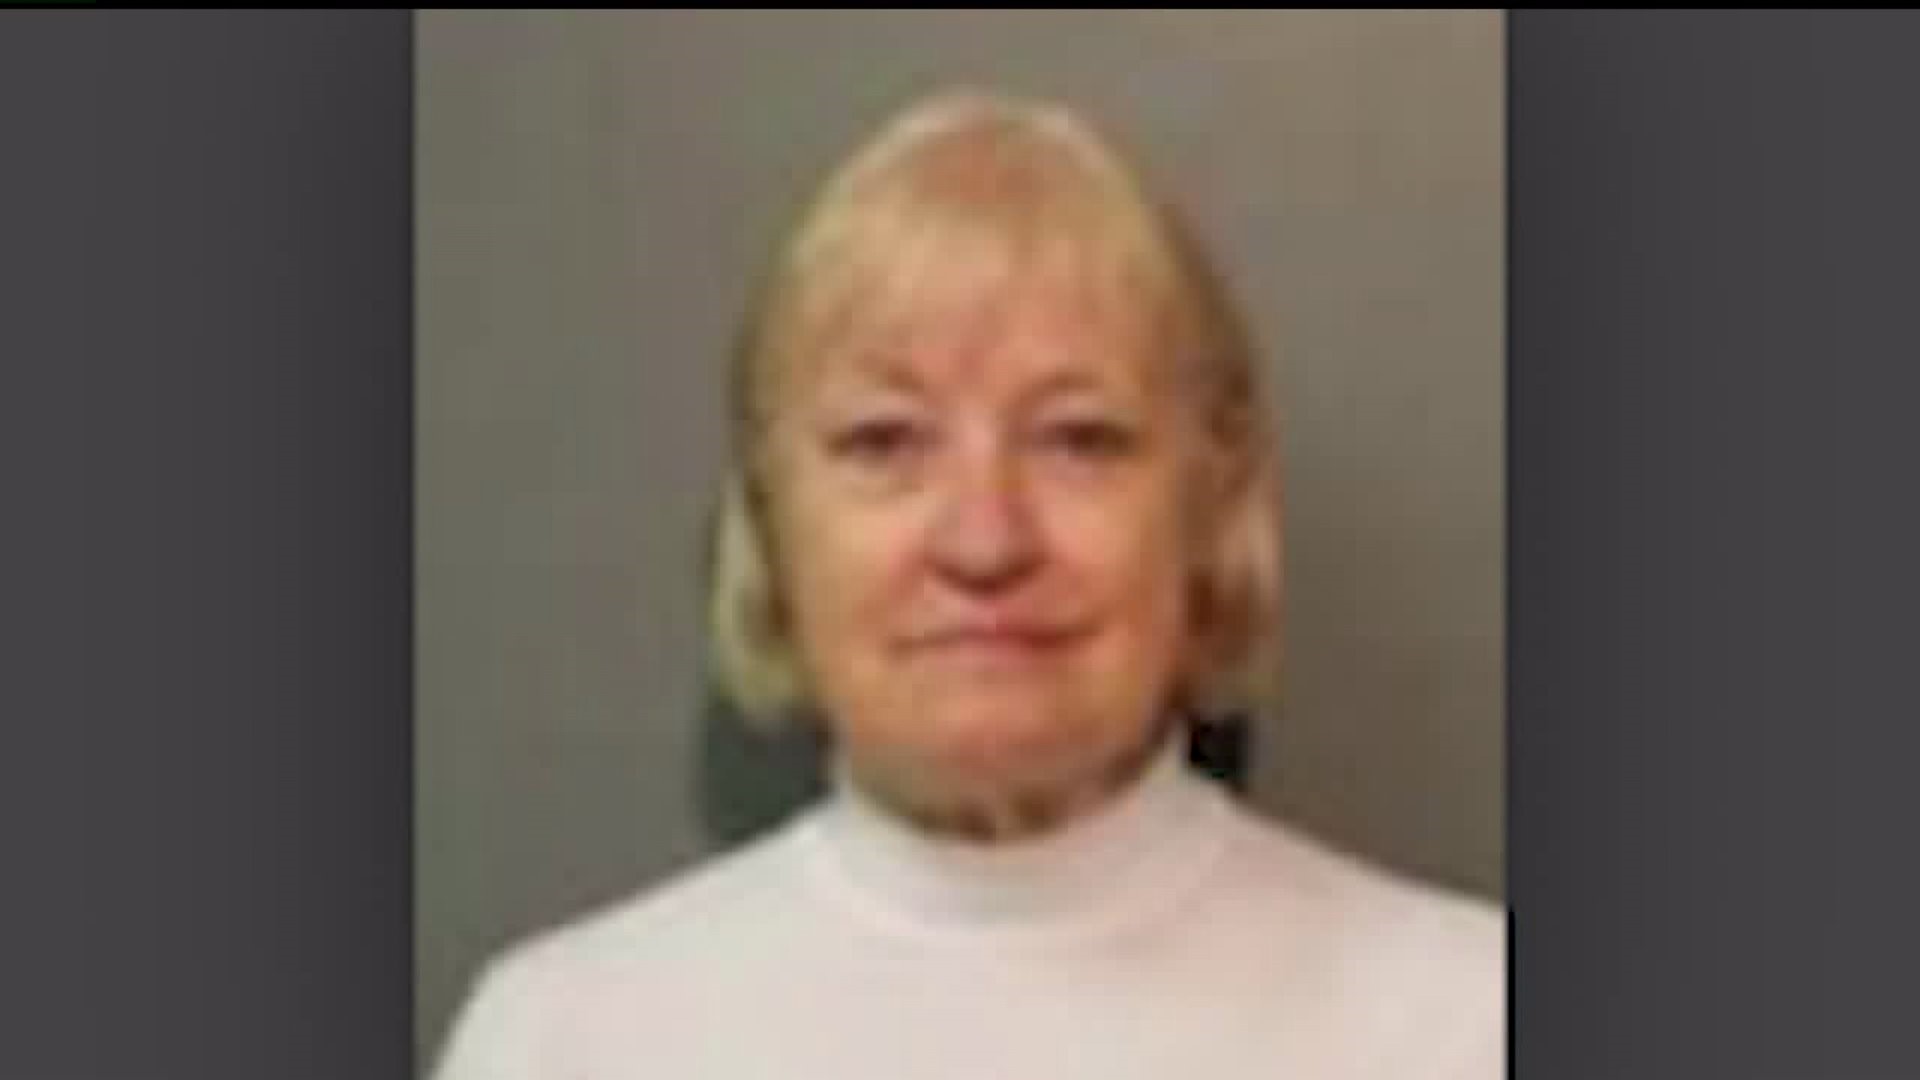 `Serial stowaway` was arrested again for trying to board a flight in Chicago with no travel documents